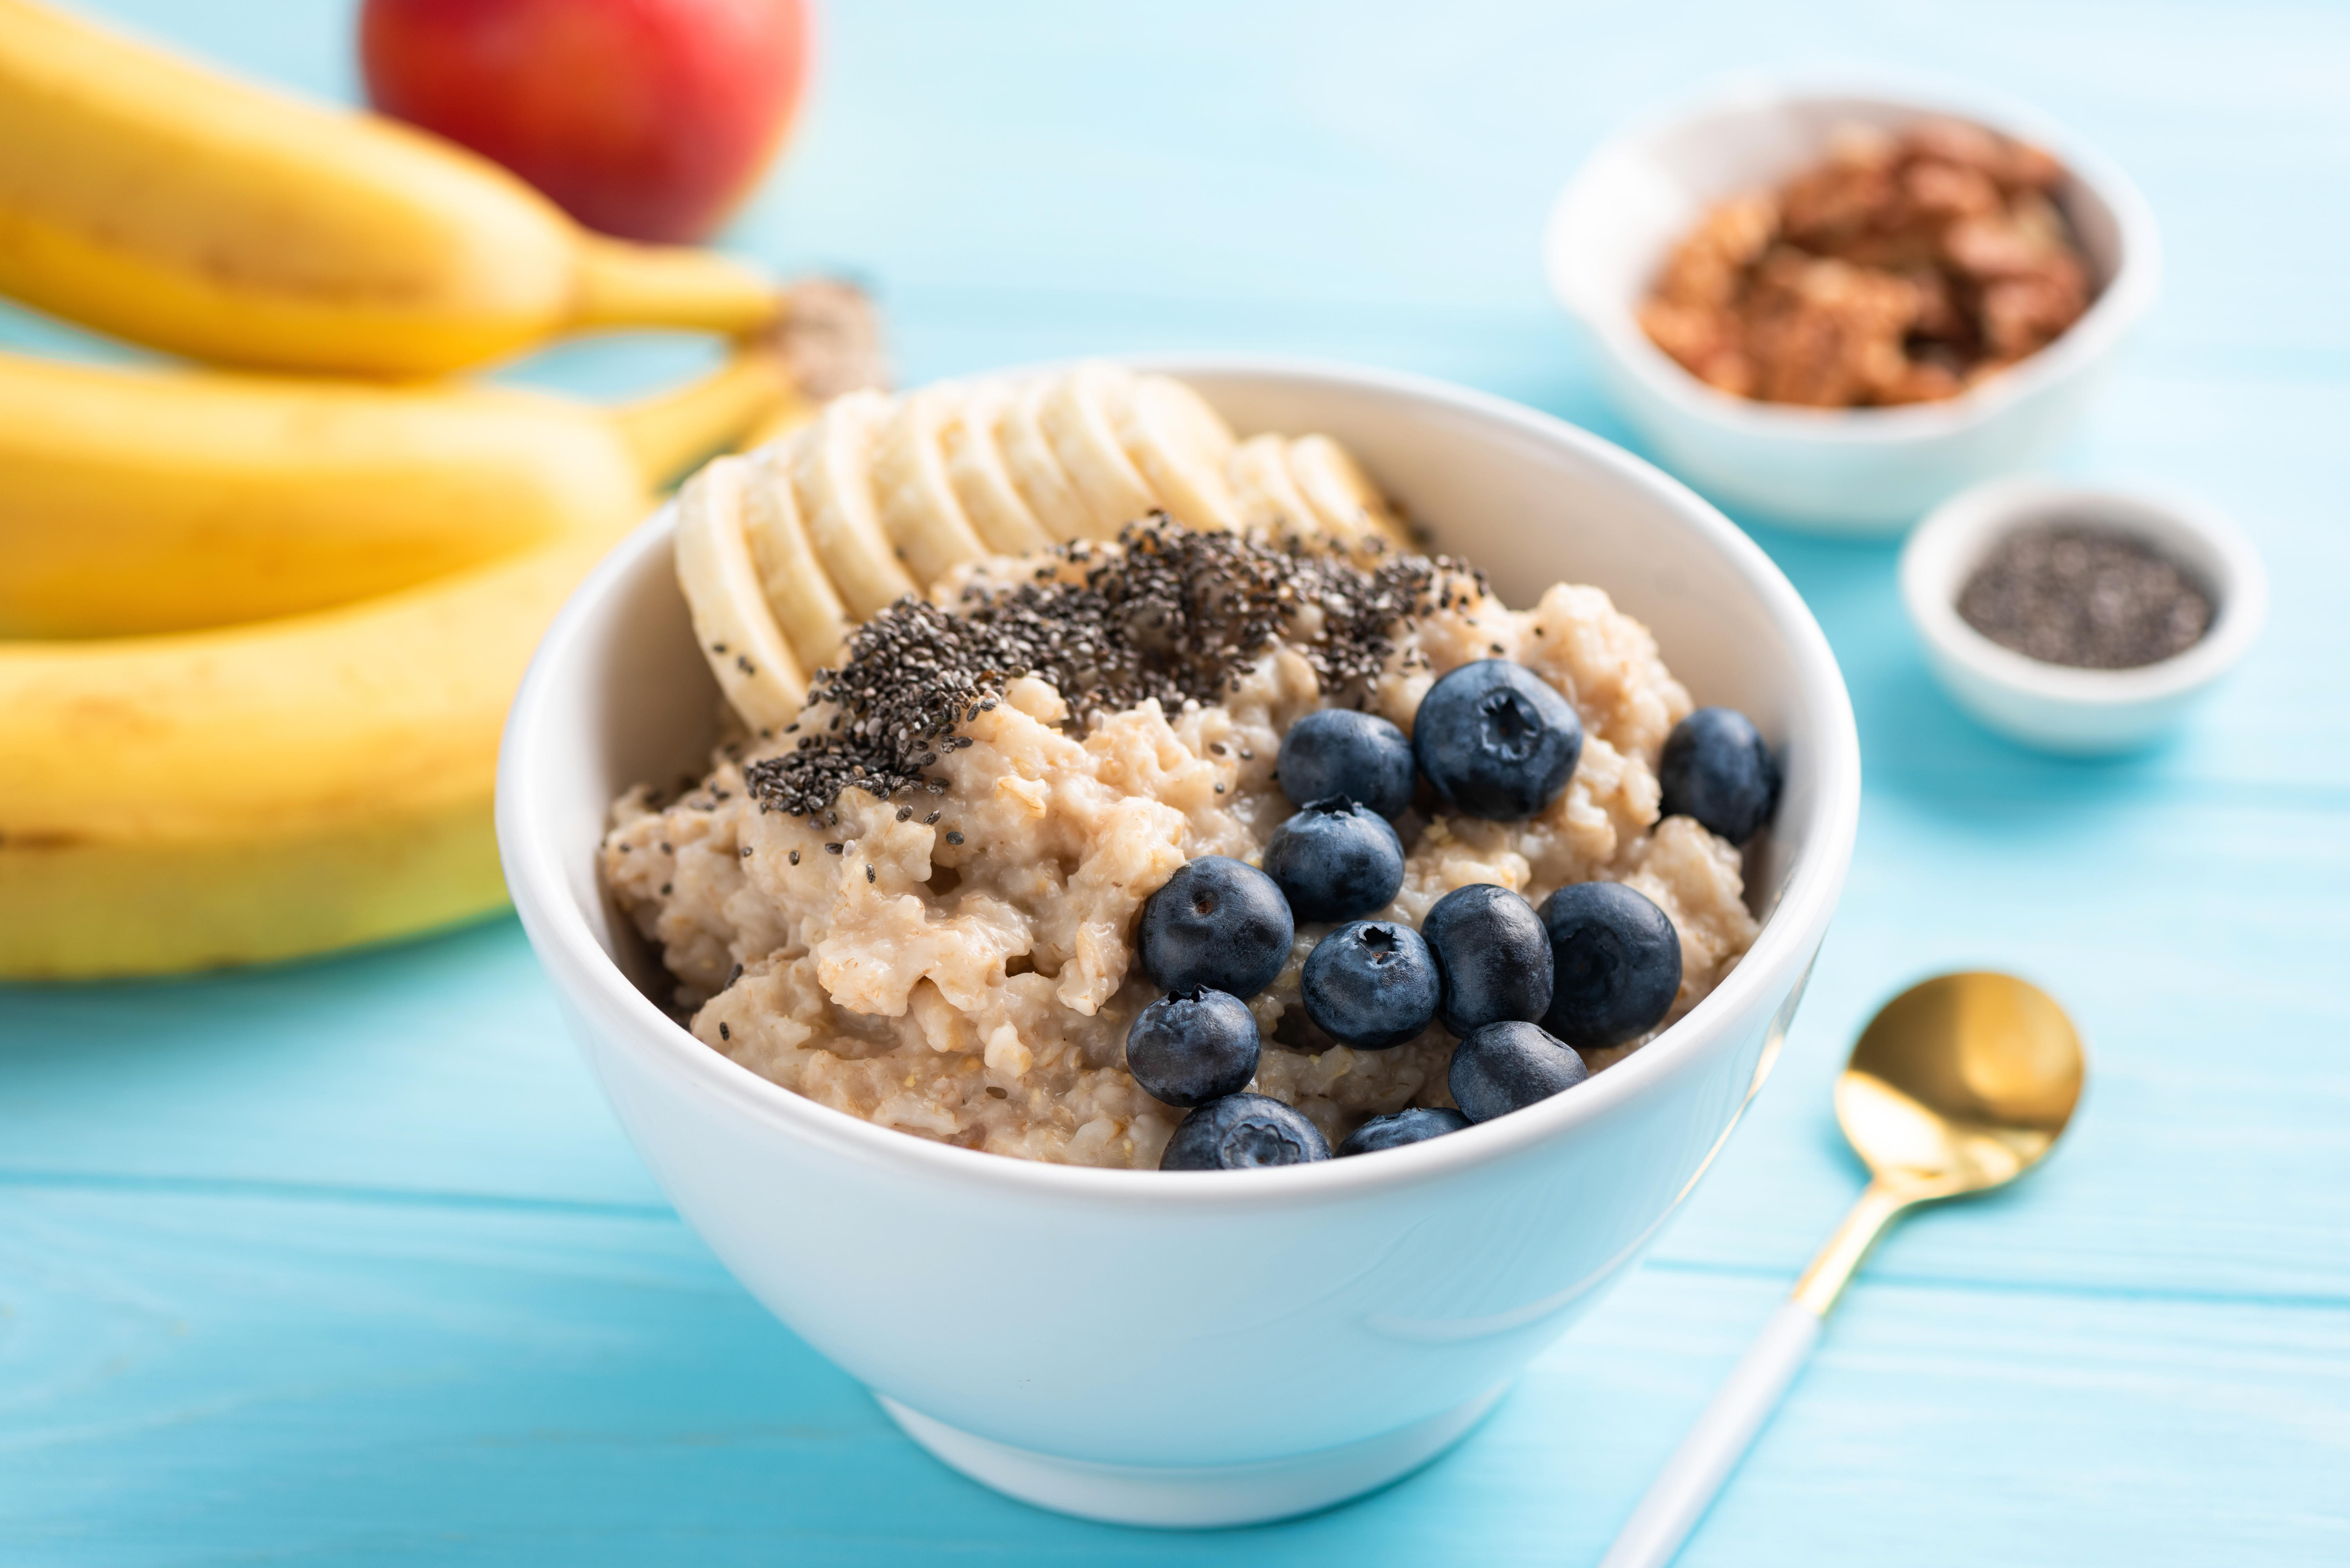 A bowl of porridge oats with banana and blueberries 